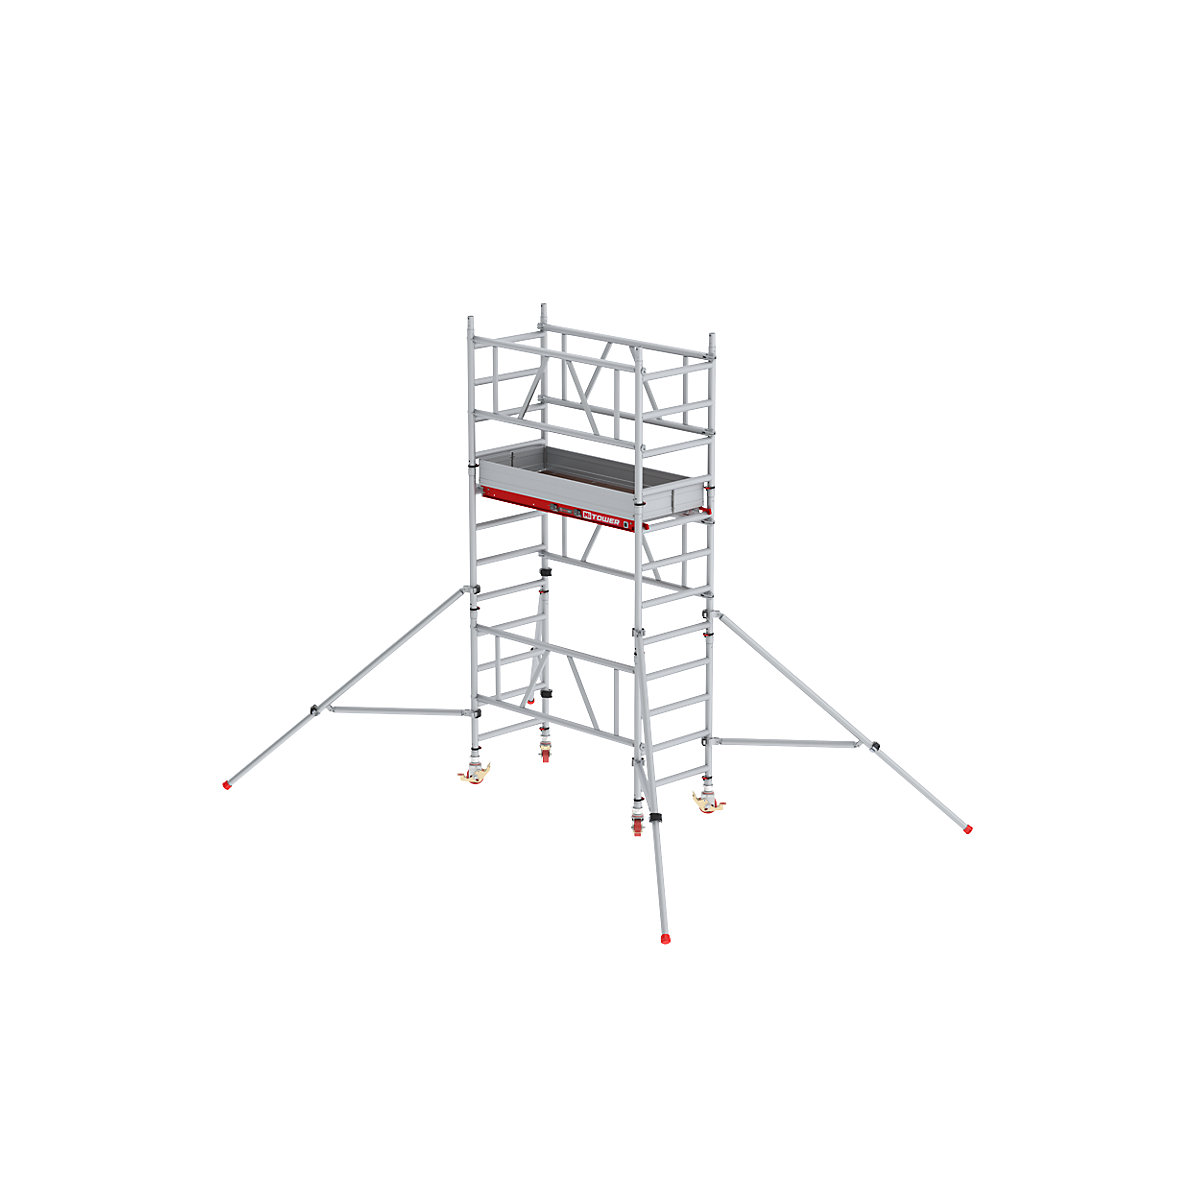 MiTOWER Plus quick assembly mobile access tower - Altrex